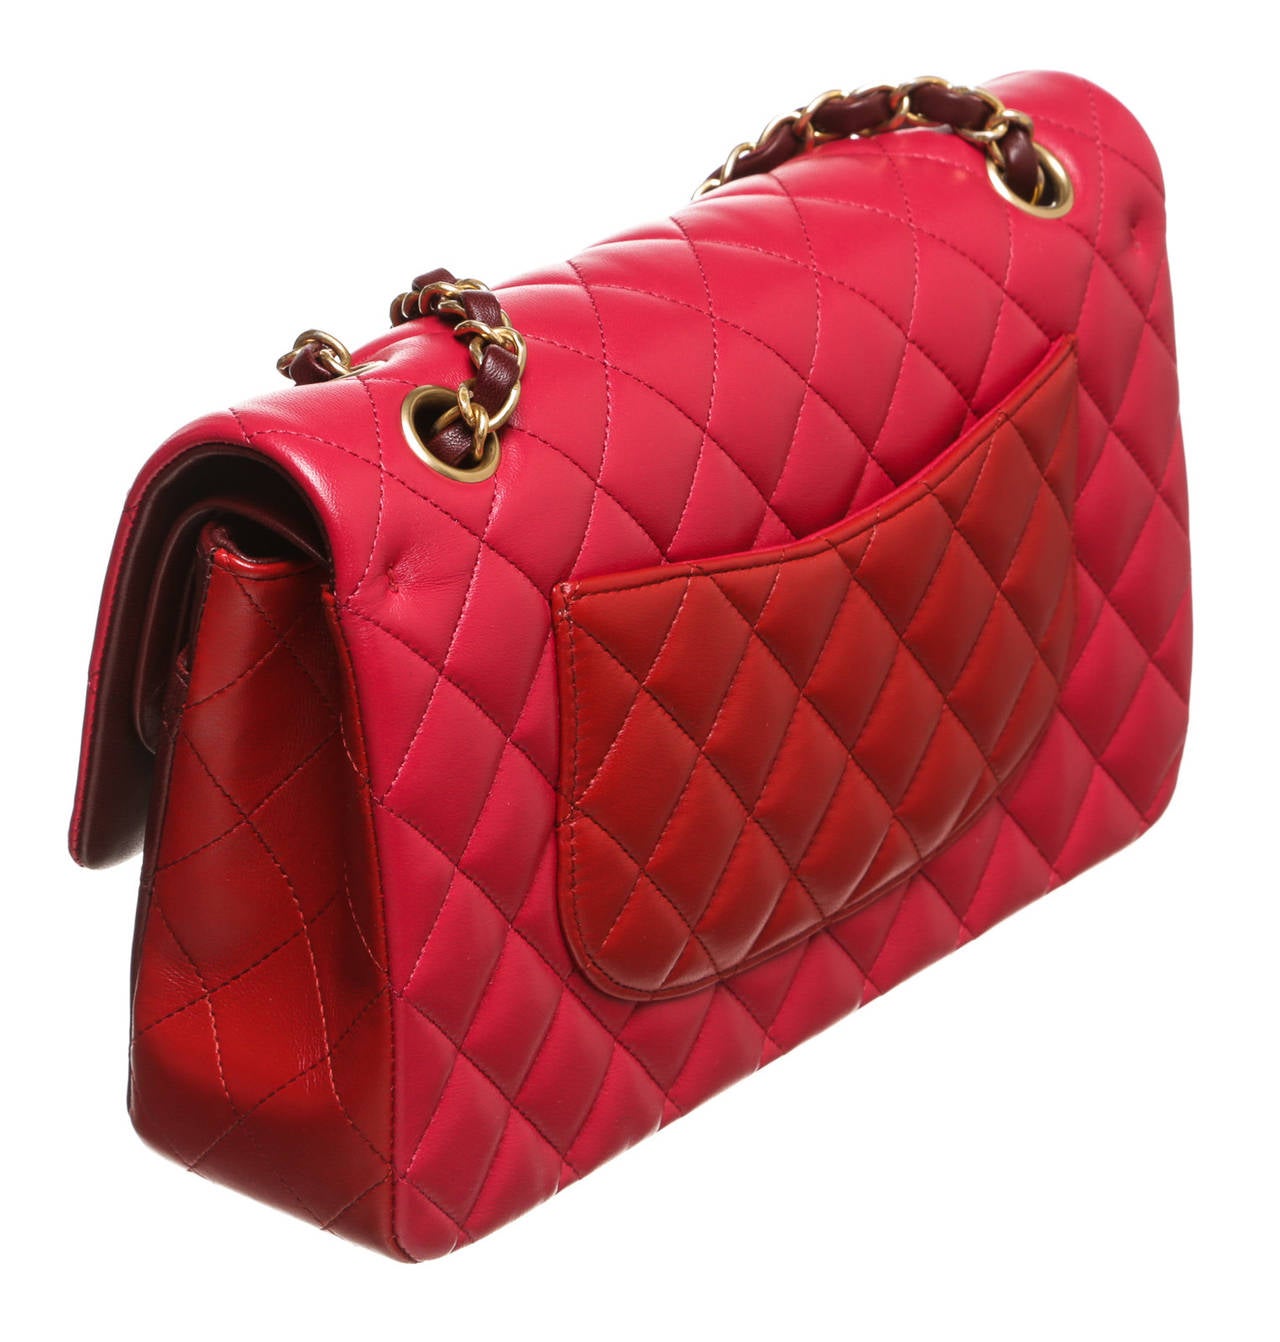 One of the most fabulous Chanel handbags has made its way into our store and it's about to make its way into your heart. This is an amazing Chanel 2.55 medium handbag colored in complementary pink, burgundy, and red. This is quickly becoming an